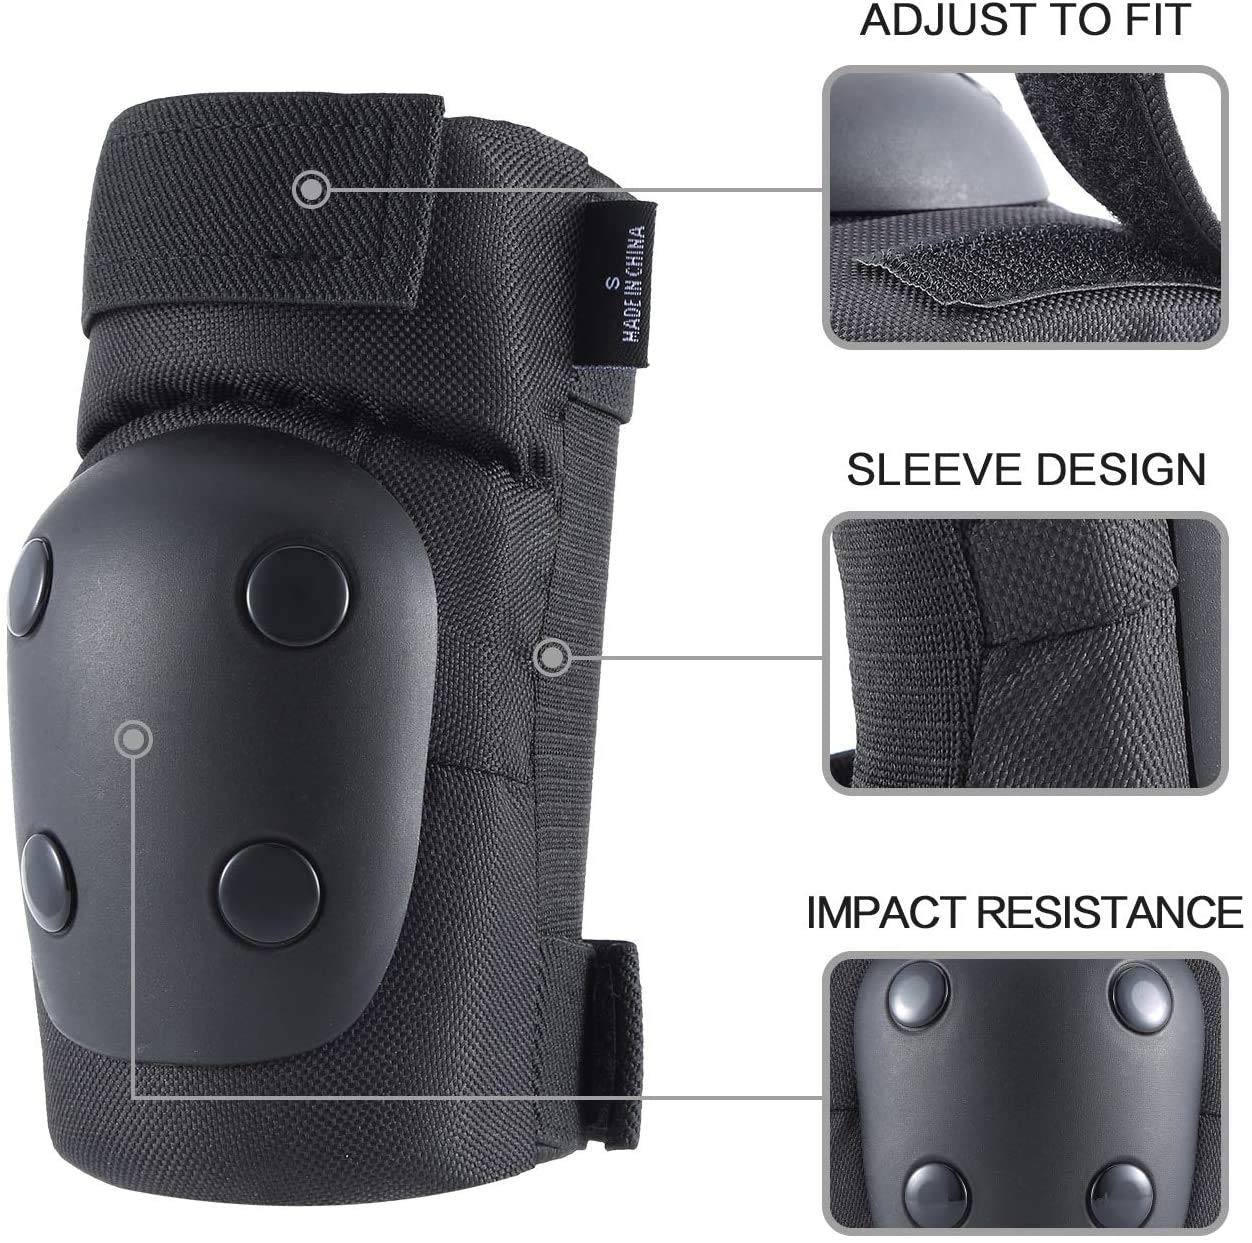 Banzk Adult/Child Knee Pads Elbow Pads Wrist Guards 3 in 1 Protective Gear Set for Skateboarding Inline Roller Biking Roller Skating Cycling Outdoor Sports Black M